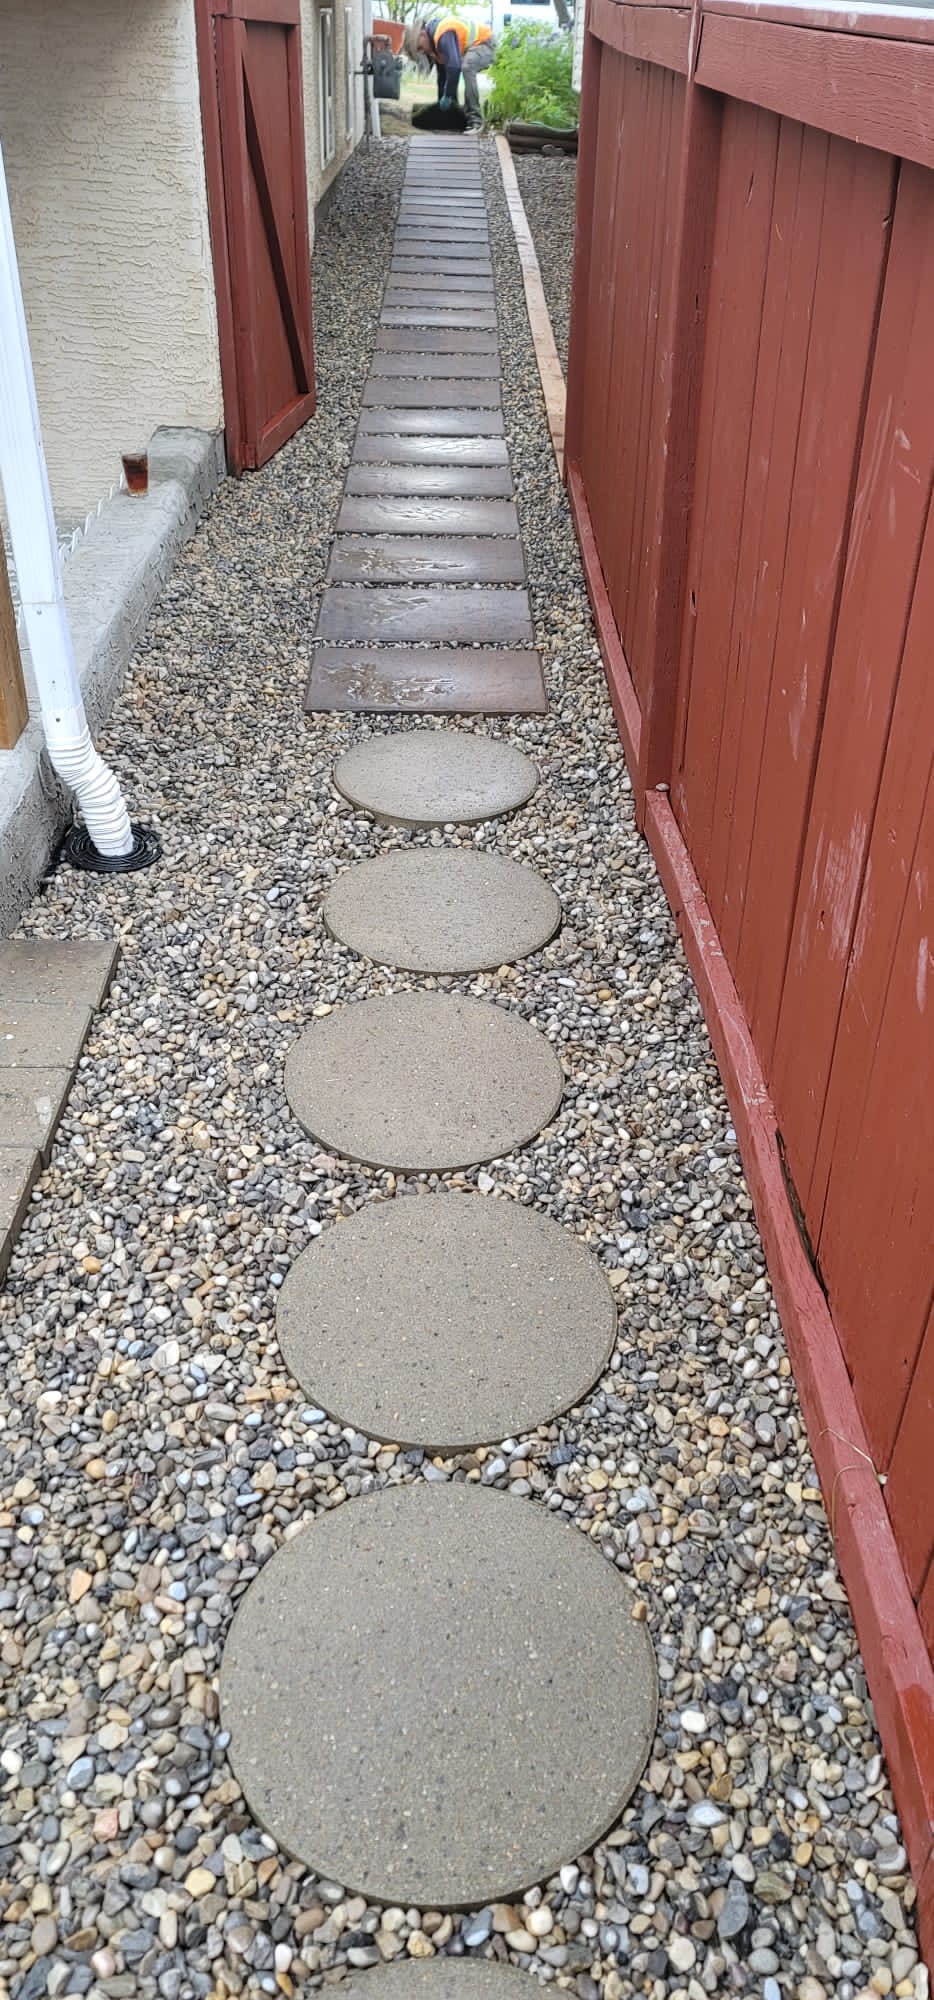 A beautifully landscaped garden stone pathway adorned with carefully arranged pathway stones, highlighting the expertise of CALGARY landscapers